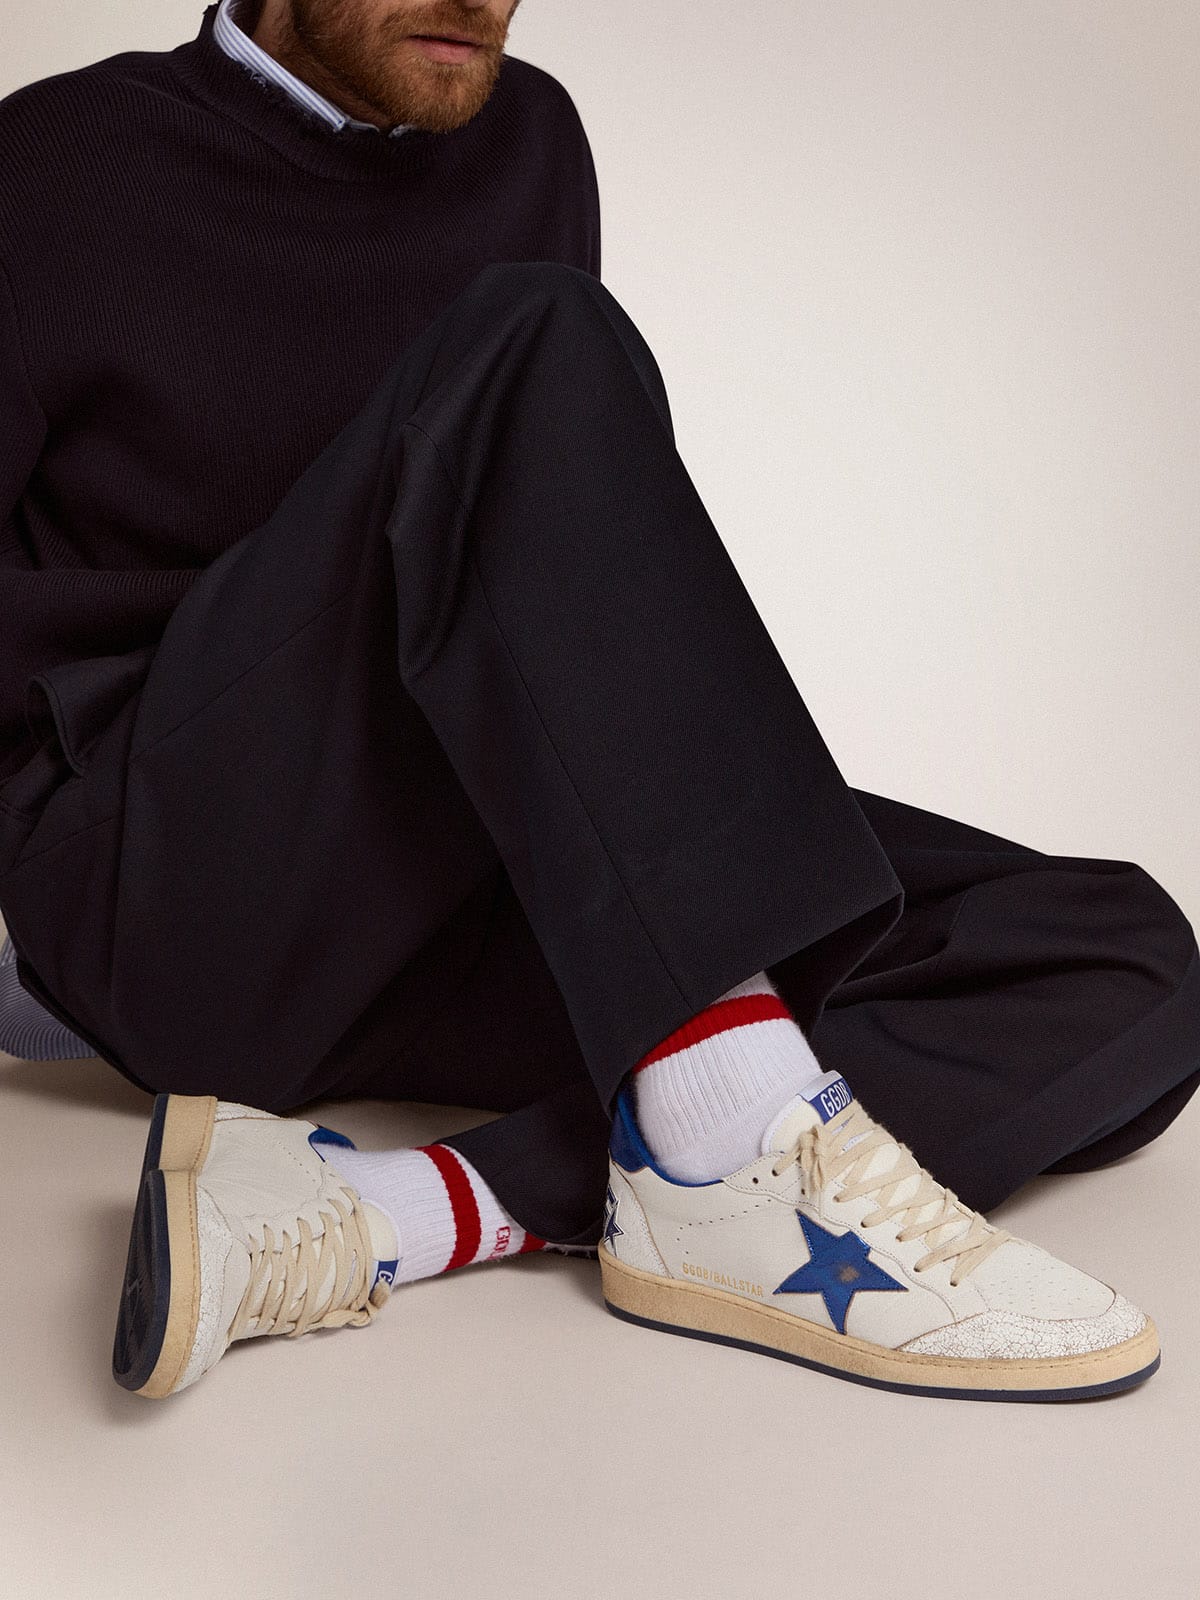 Men's Ball Star in white nappa with blue star and heel tab